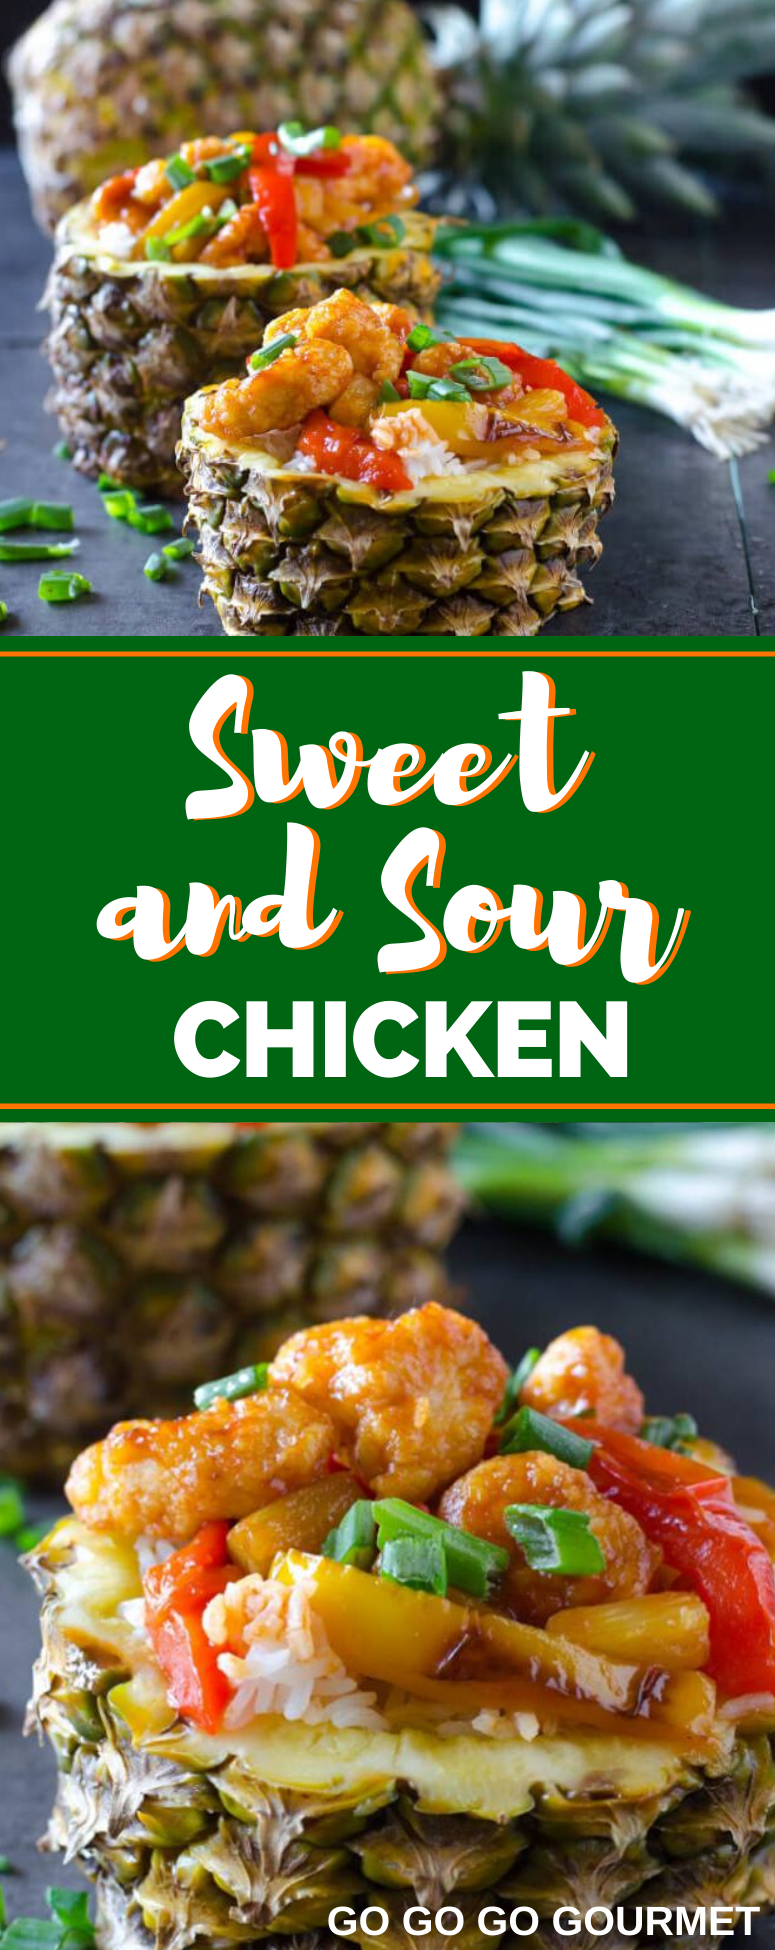 This easy Sweet and Sour Chicken recipe with pineapple is covered in the most delicious, sweet sauce. Made with bell peppers and onions and fried to perfect, this homemade version is so much better than takeout! #gogogogourmet #sweetandsourchicken #homemadechinesefood #chinesefood via @gogogogourmet